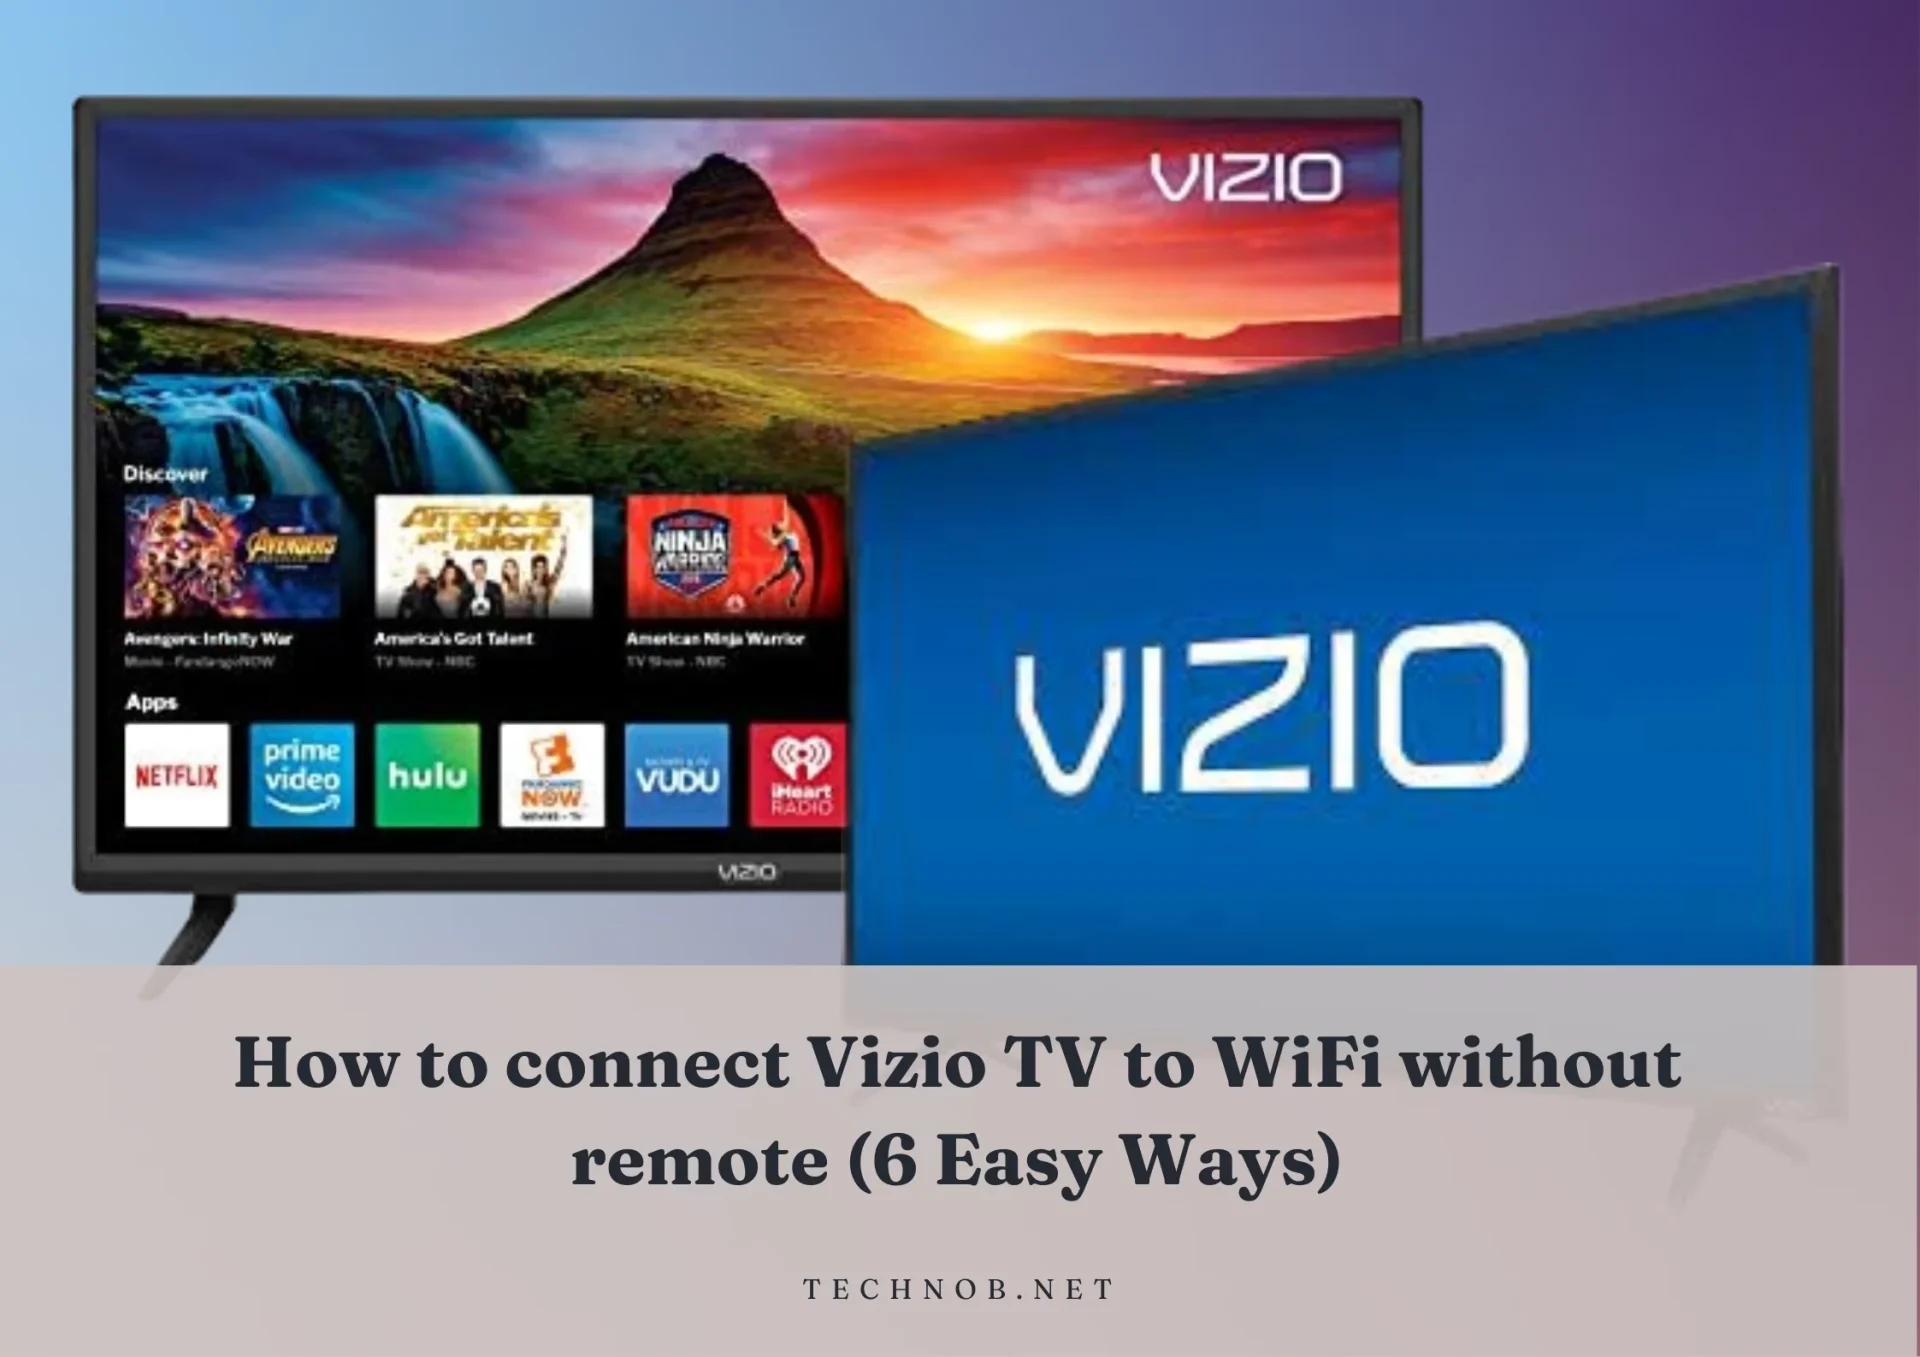 How to connect Vizio TV to WiFi without remote